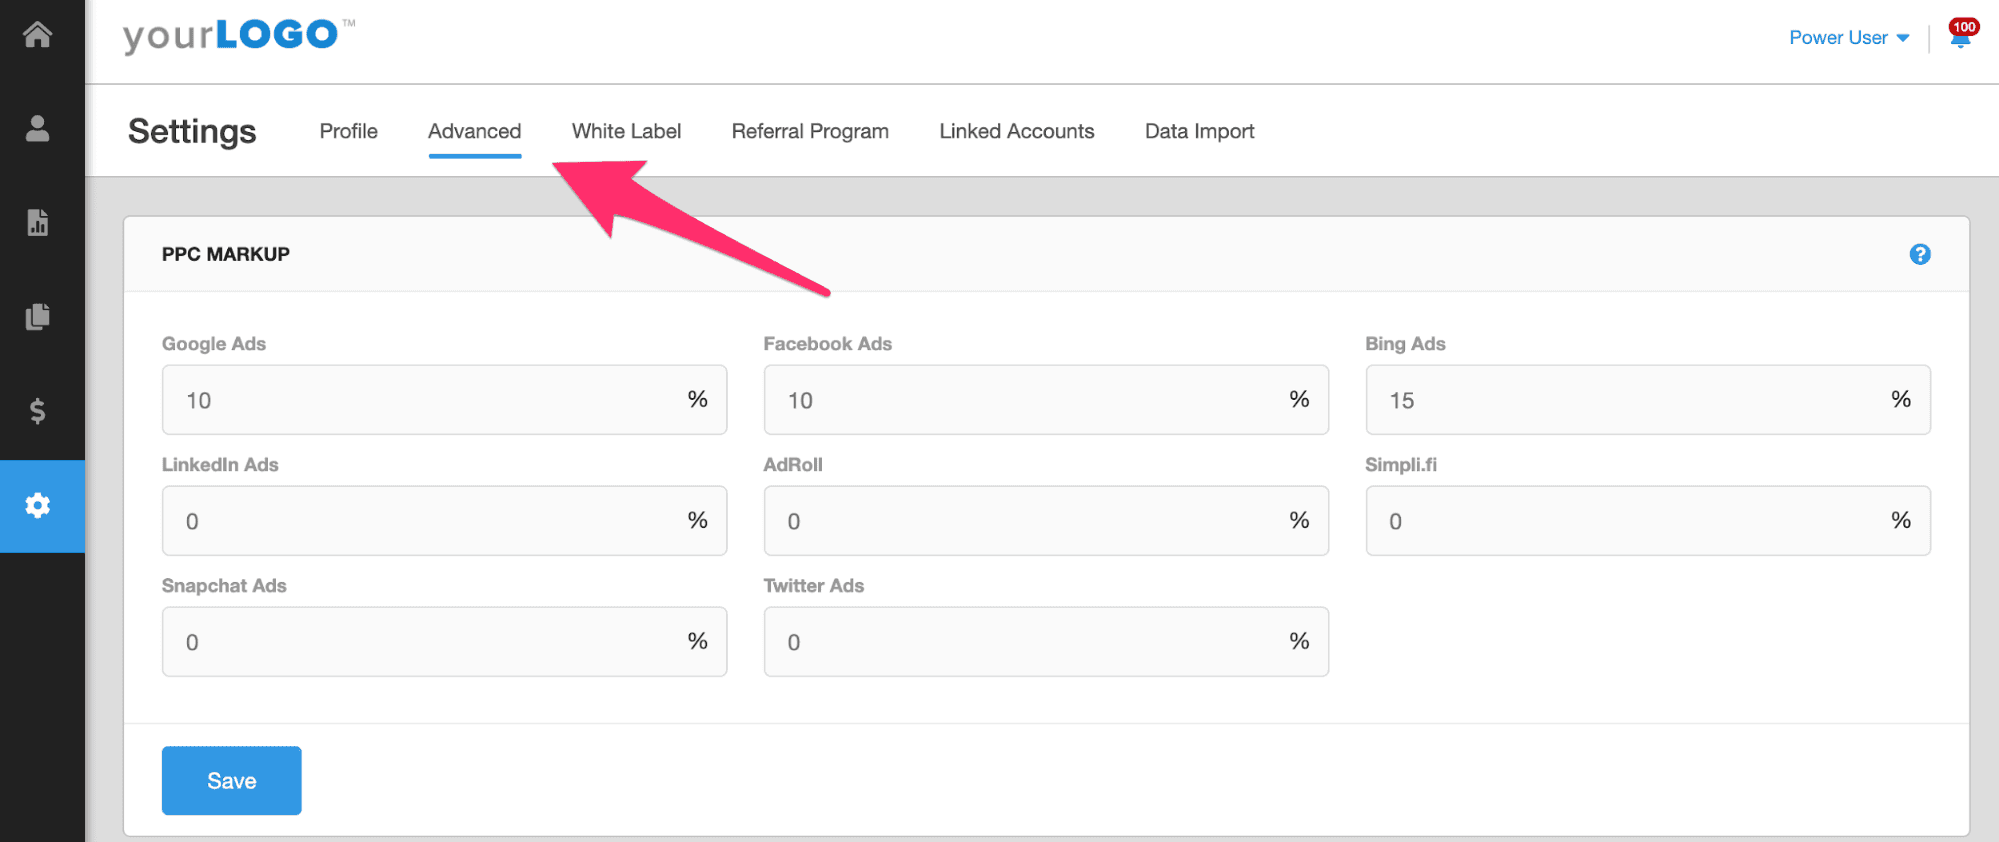 Add a PPC Markup to Your Agency's Reporting Dashboard